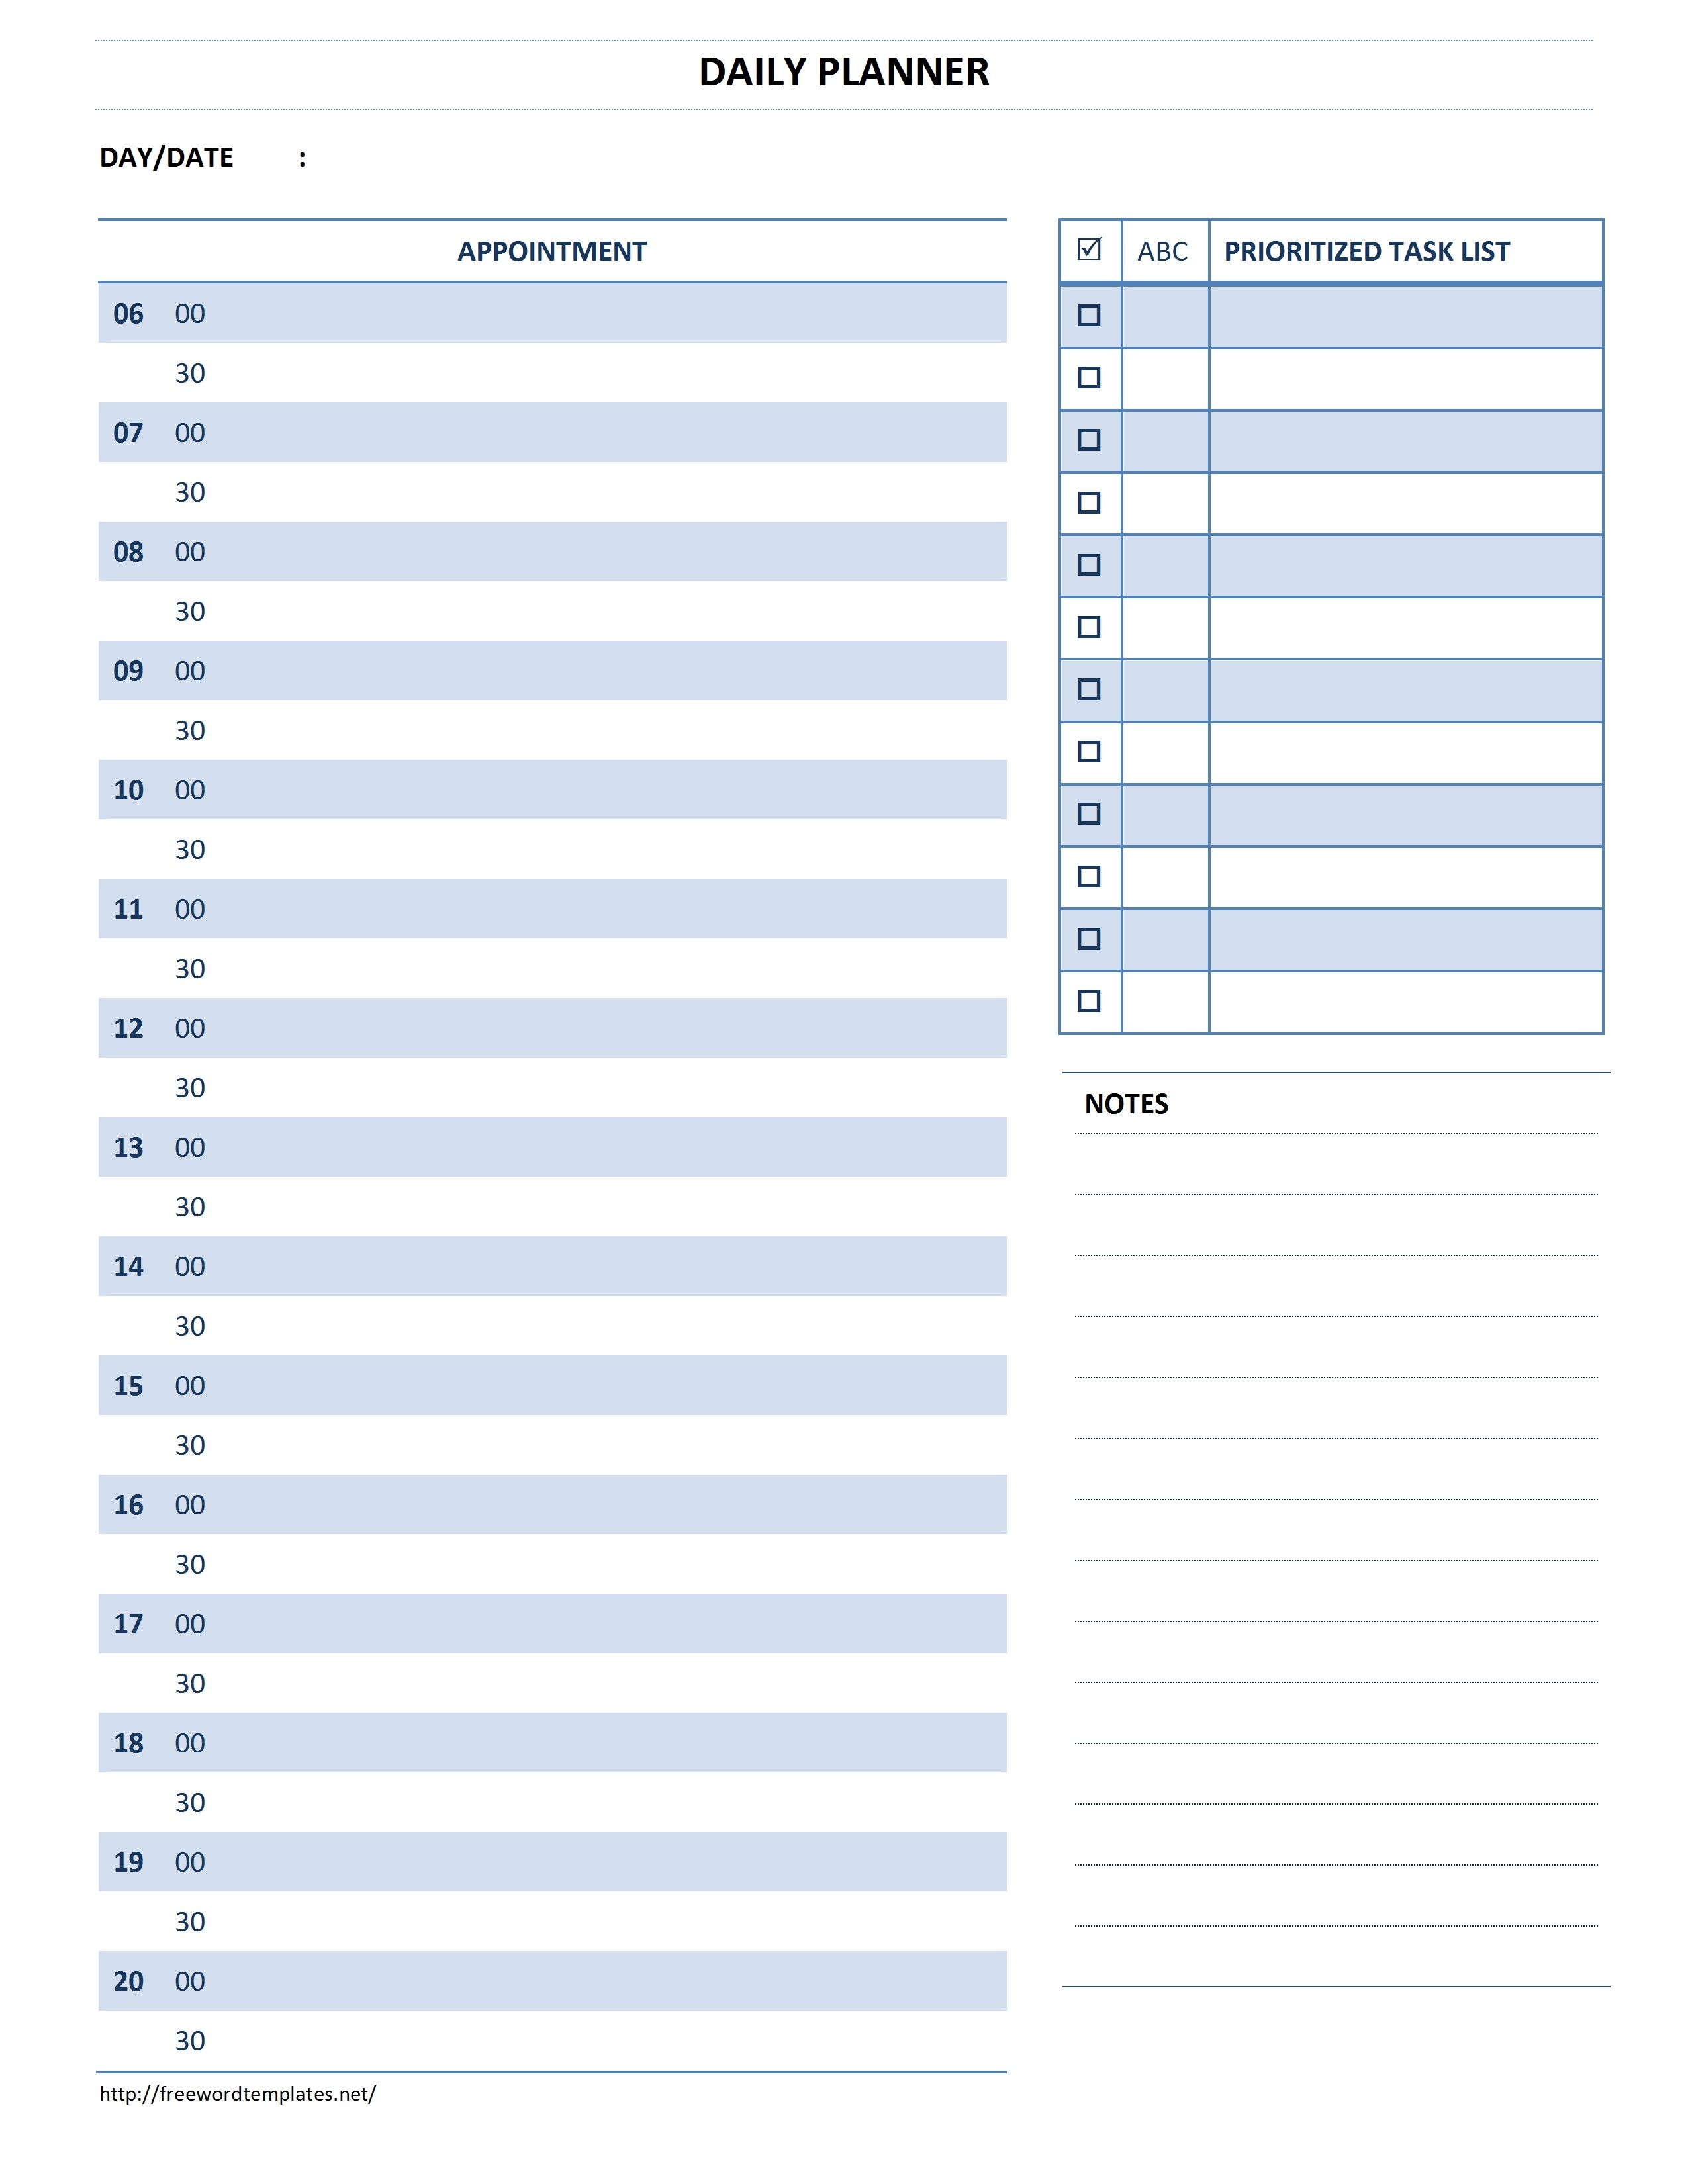 Daily Planner Template Word Free Printable Appointment Pages - Free Printable Appointment Planner